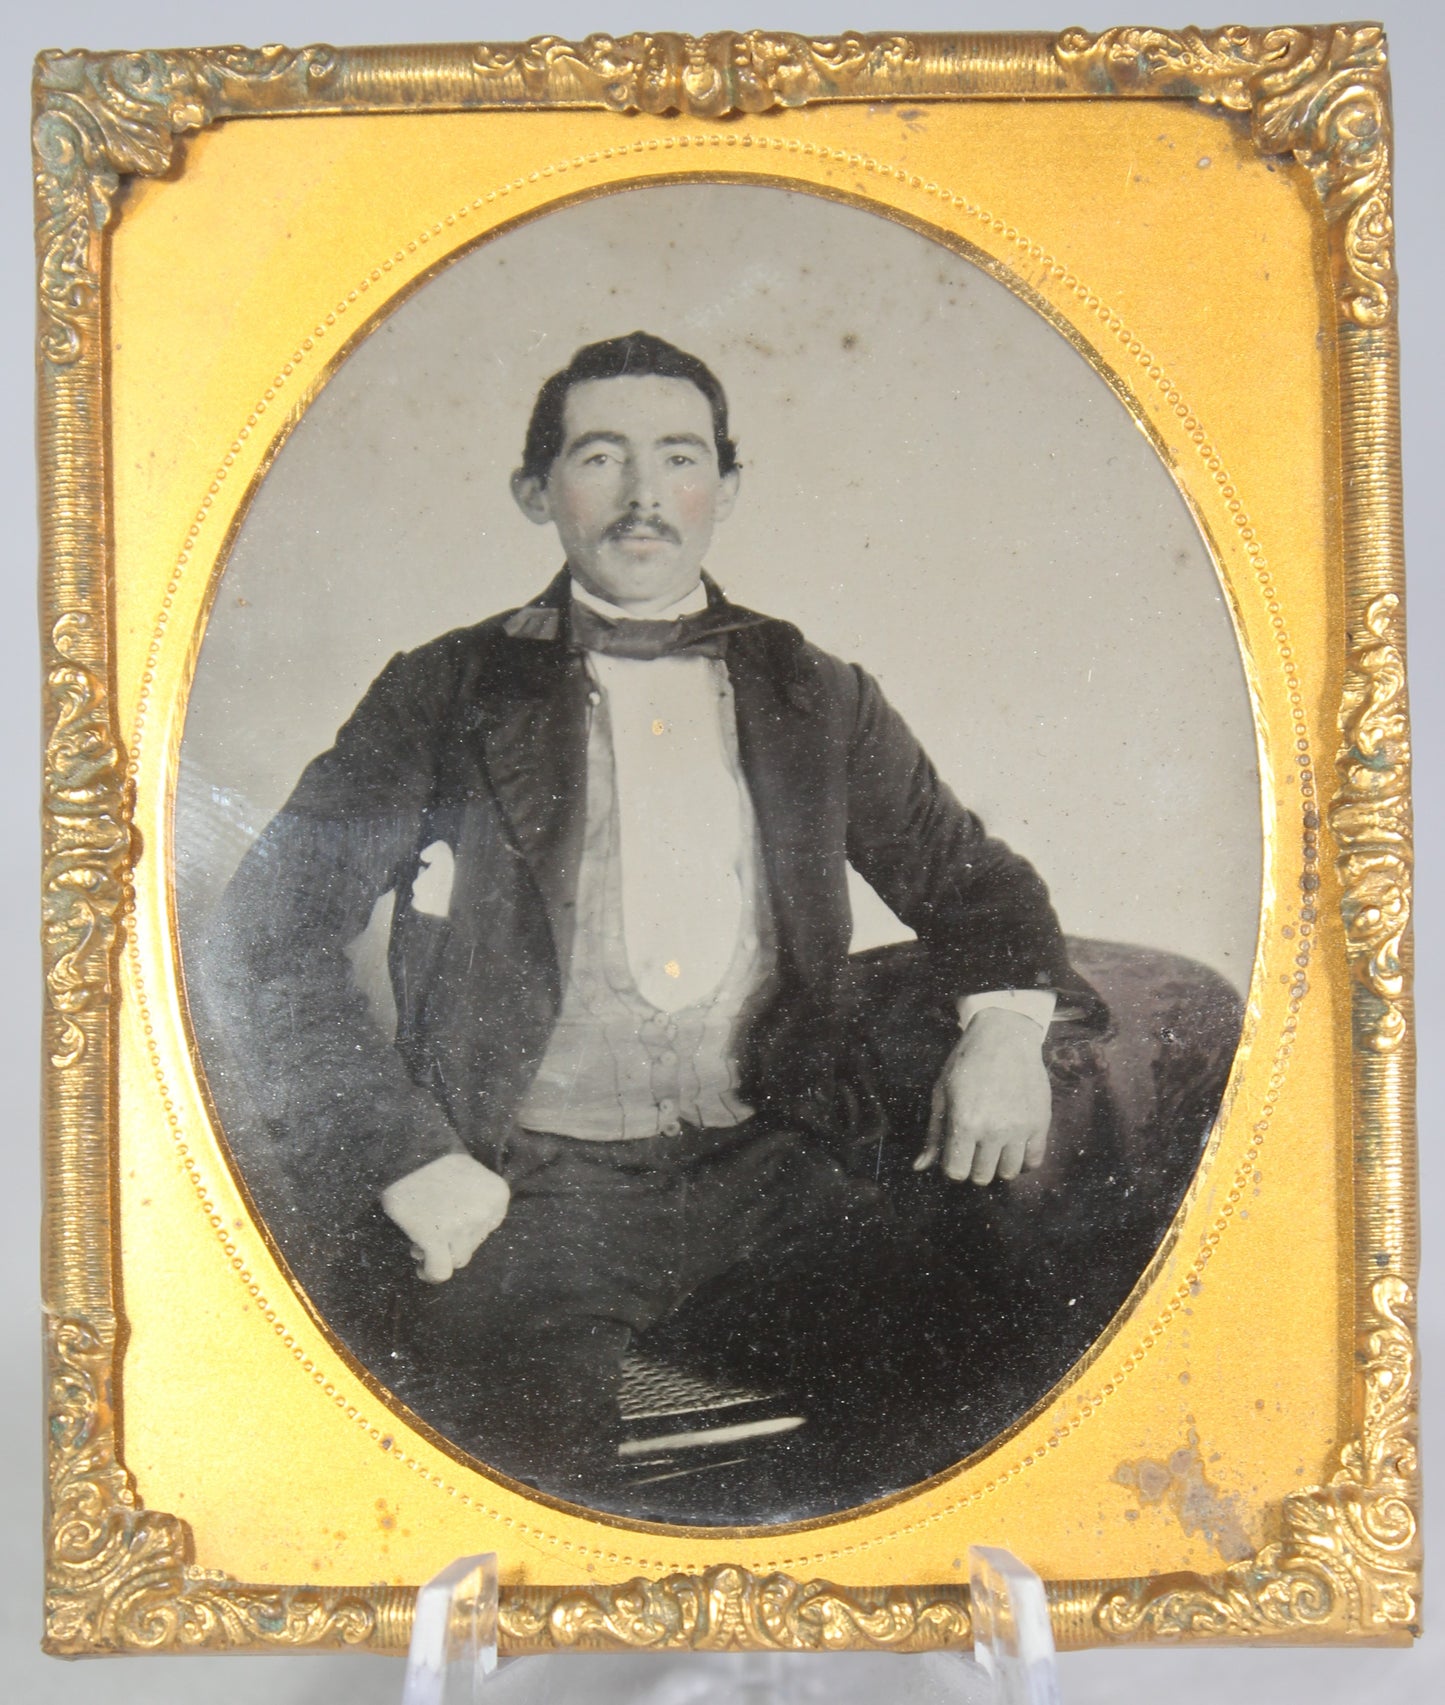 Ambrotype Photograph of a Proud Looking Man